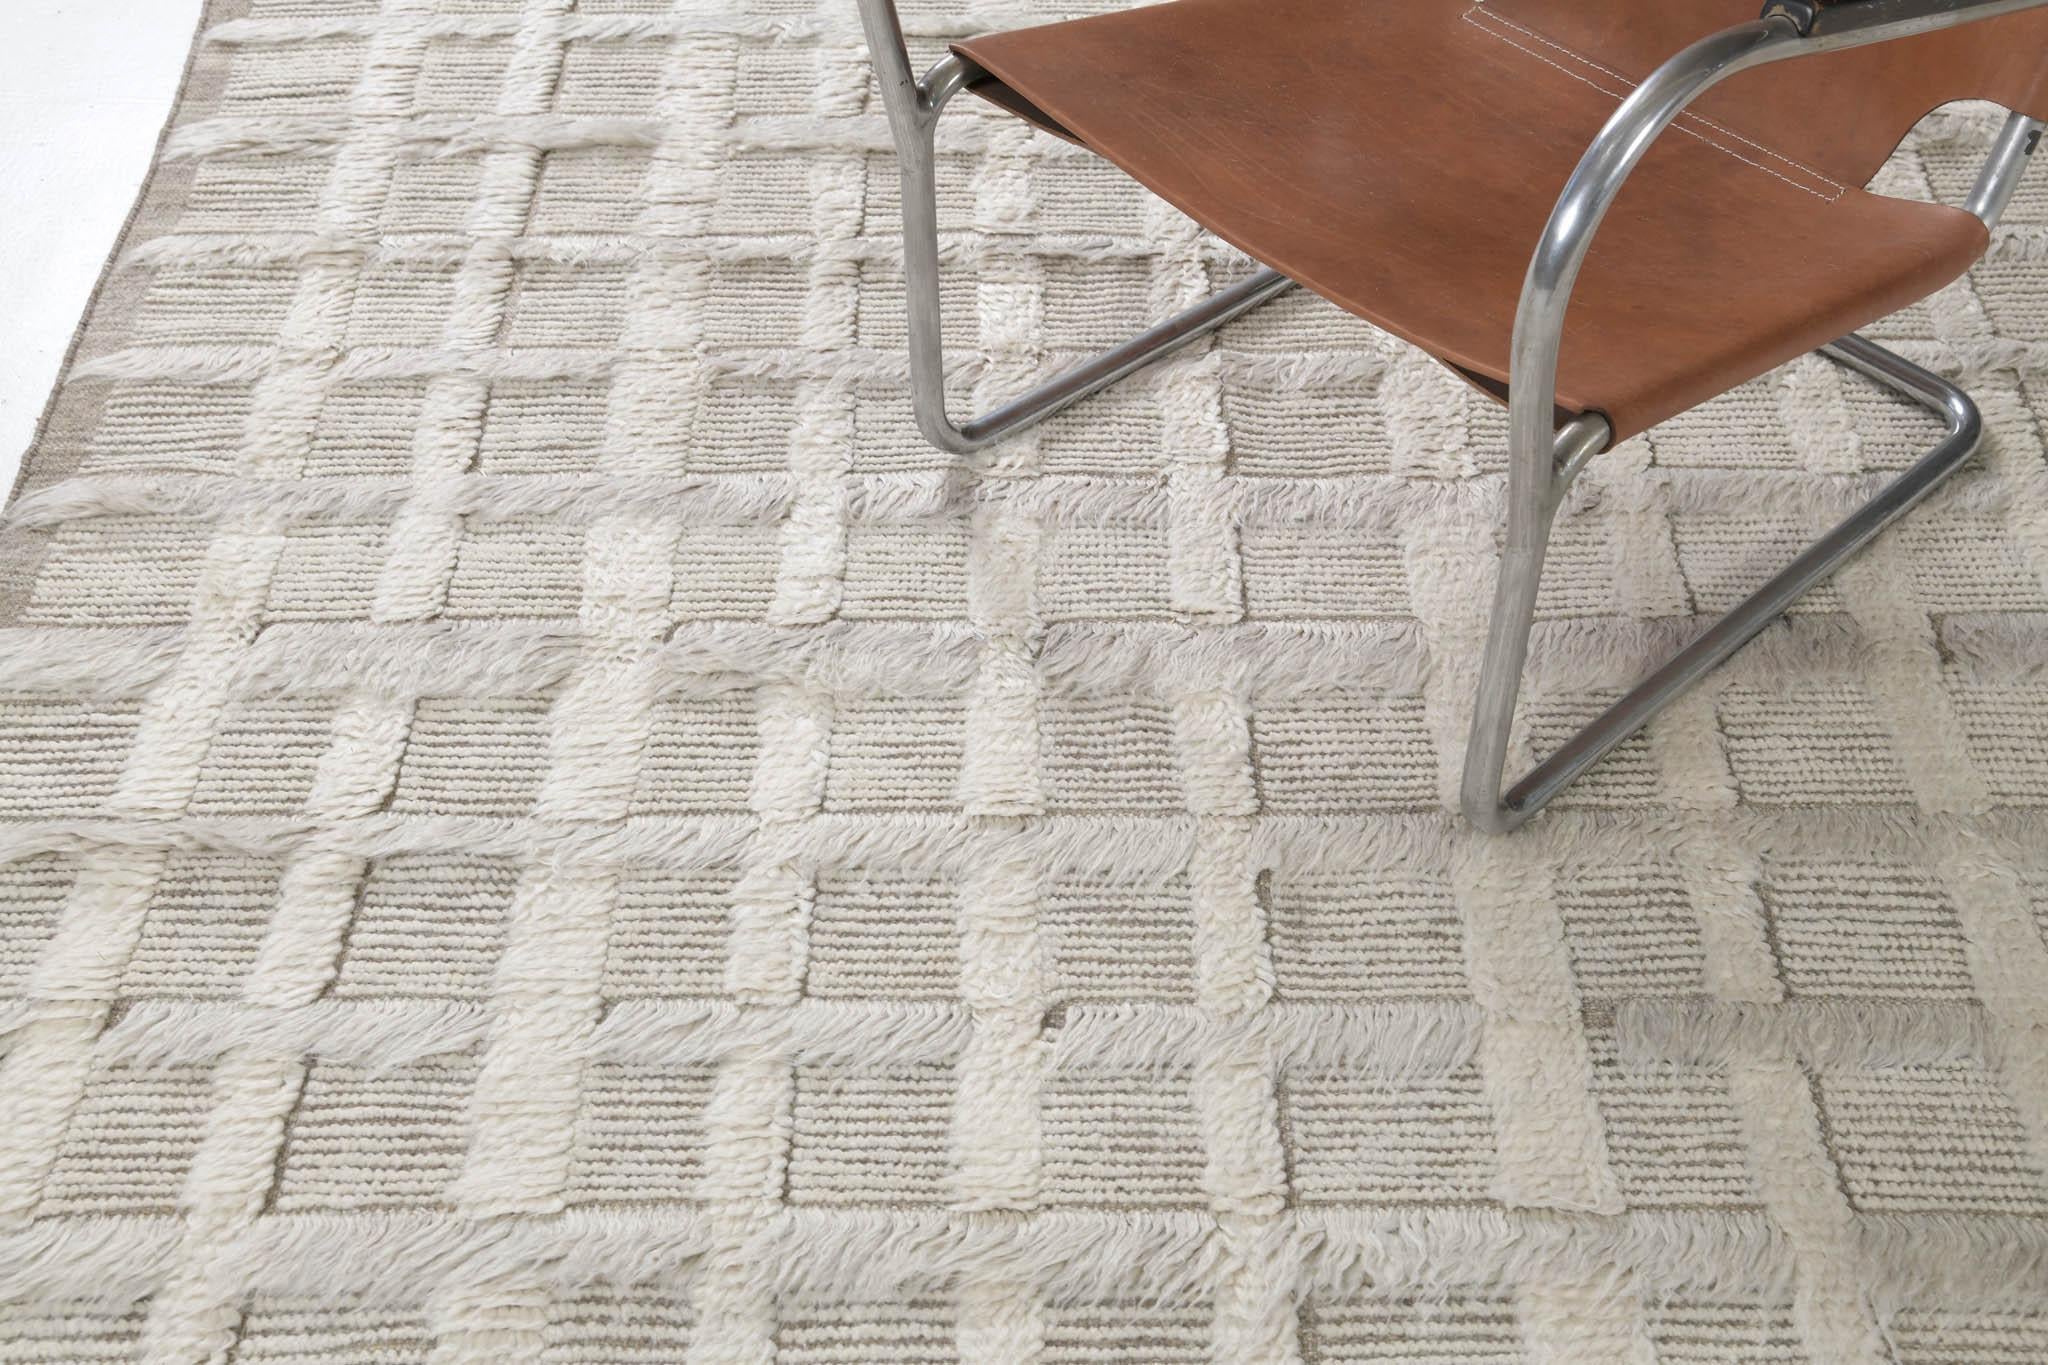 This Persian Jejim Kilim is a banded flat weave with alternating hues of cream, khaki, and clay brown in multi-column stripes. Persian flatweaves are made up of some of the best wool and weaved exceptionally to create interesting textures. This